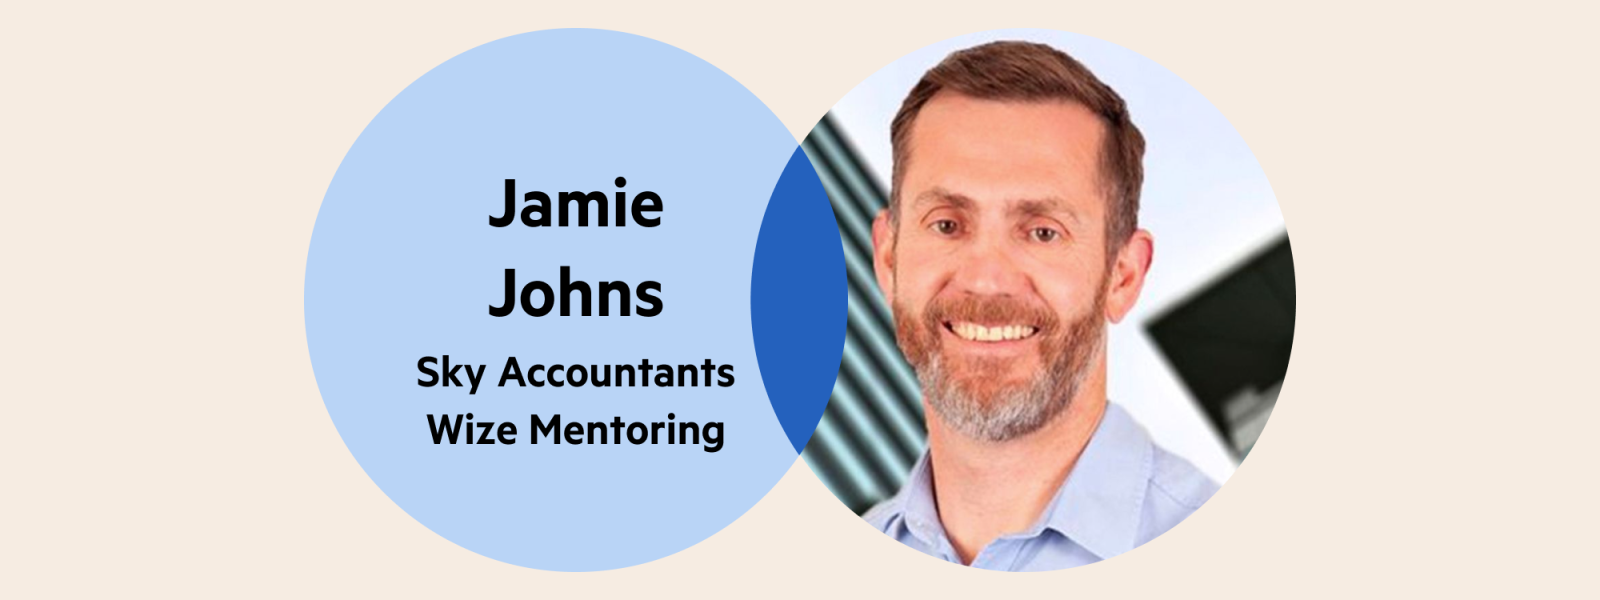 A Venn Diagram: the left circle is pale blue with the words 'Jamie Johns, Sky Accountants, Wize Mentoring', and the right circle is Jamie's headshot.